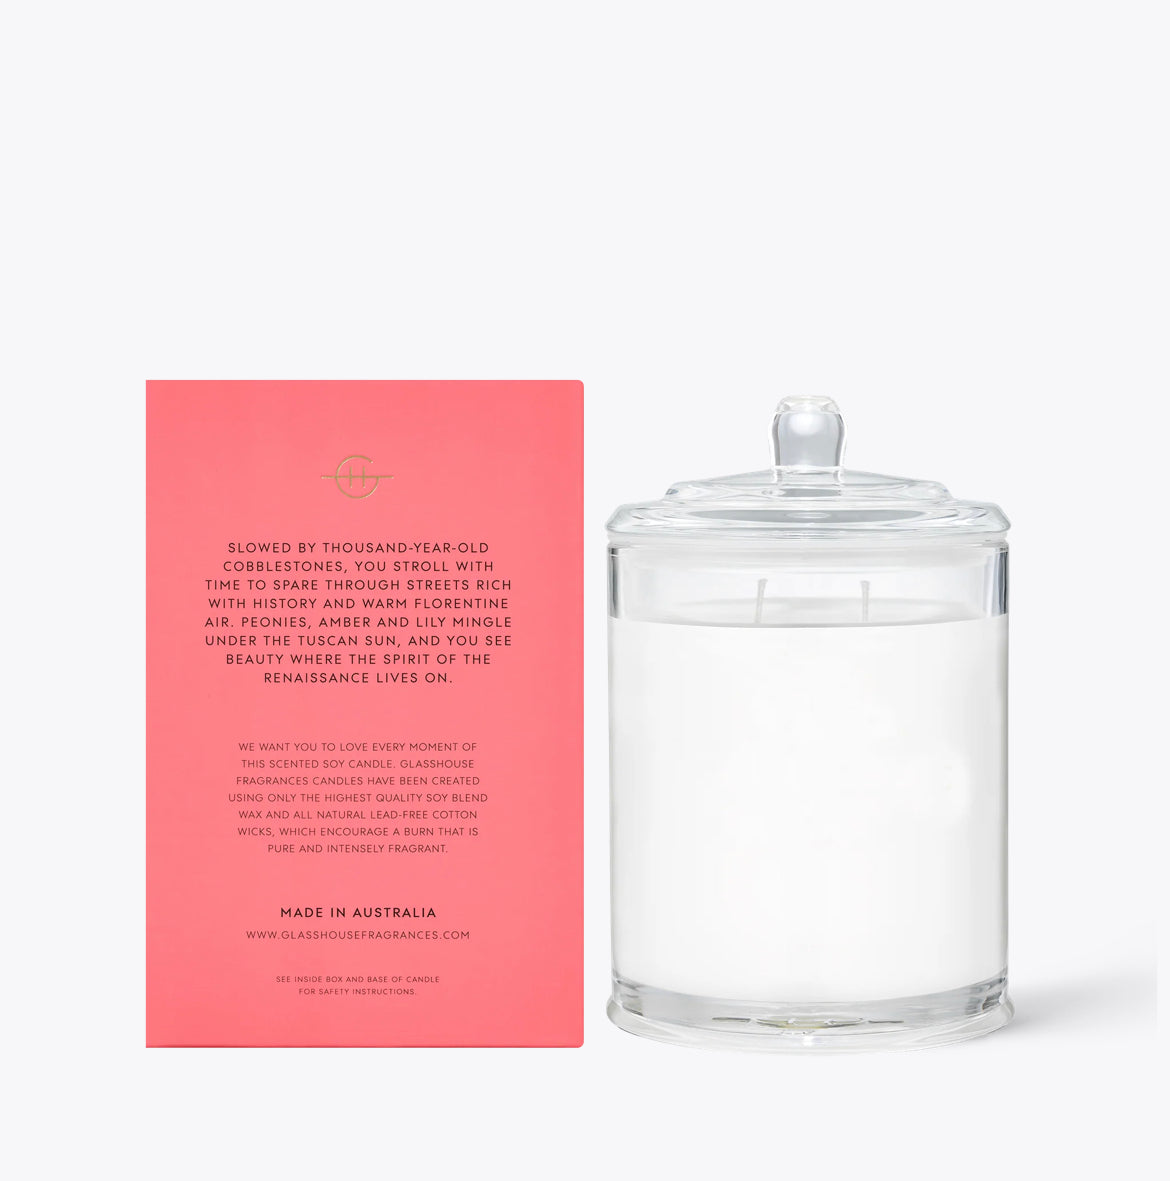 Candle - GH - Forever Florence (Wild Peonies + Lily) - 380g